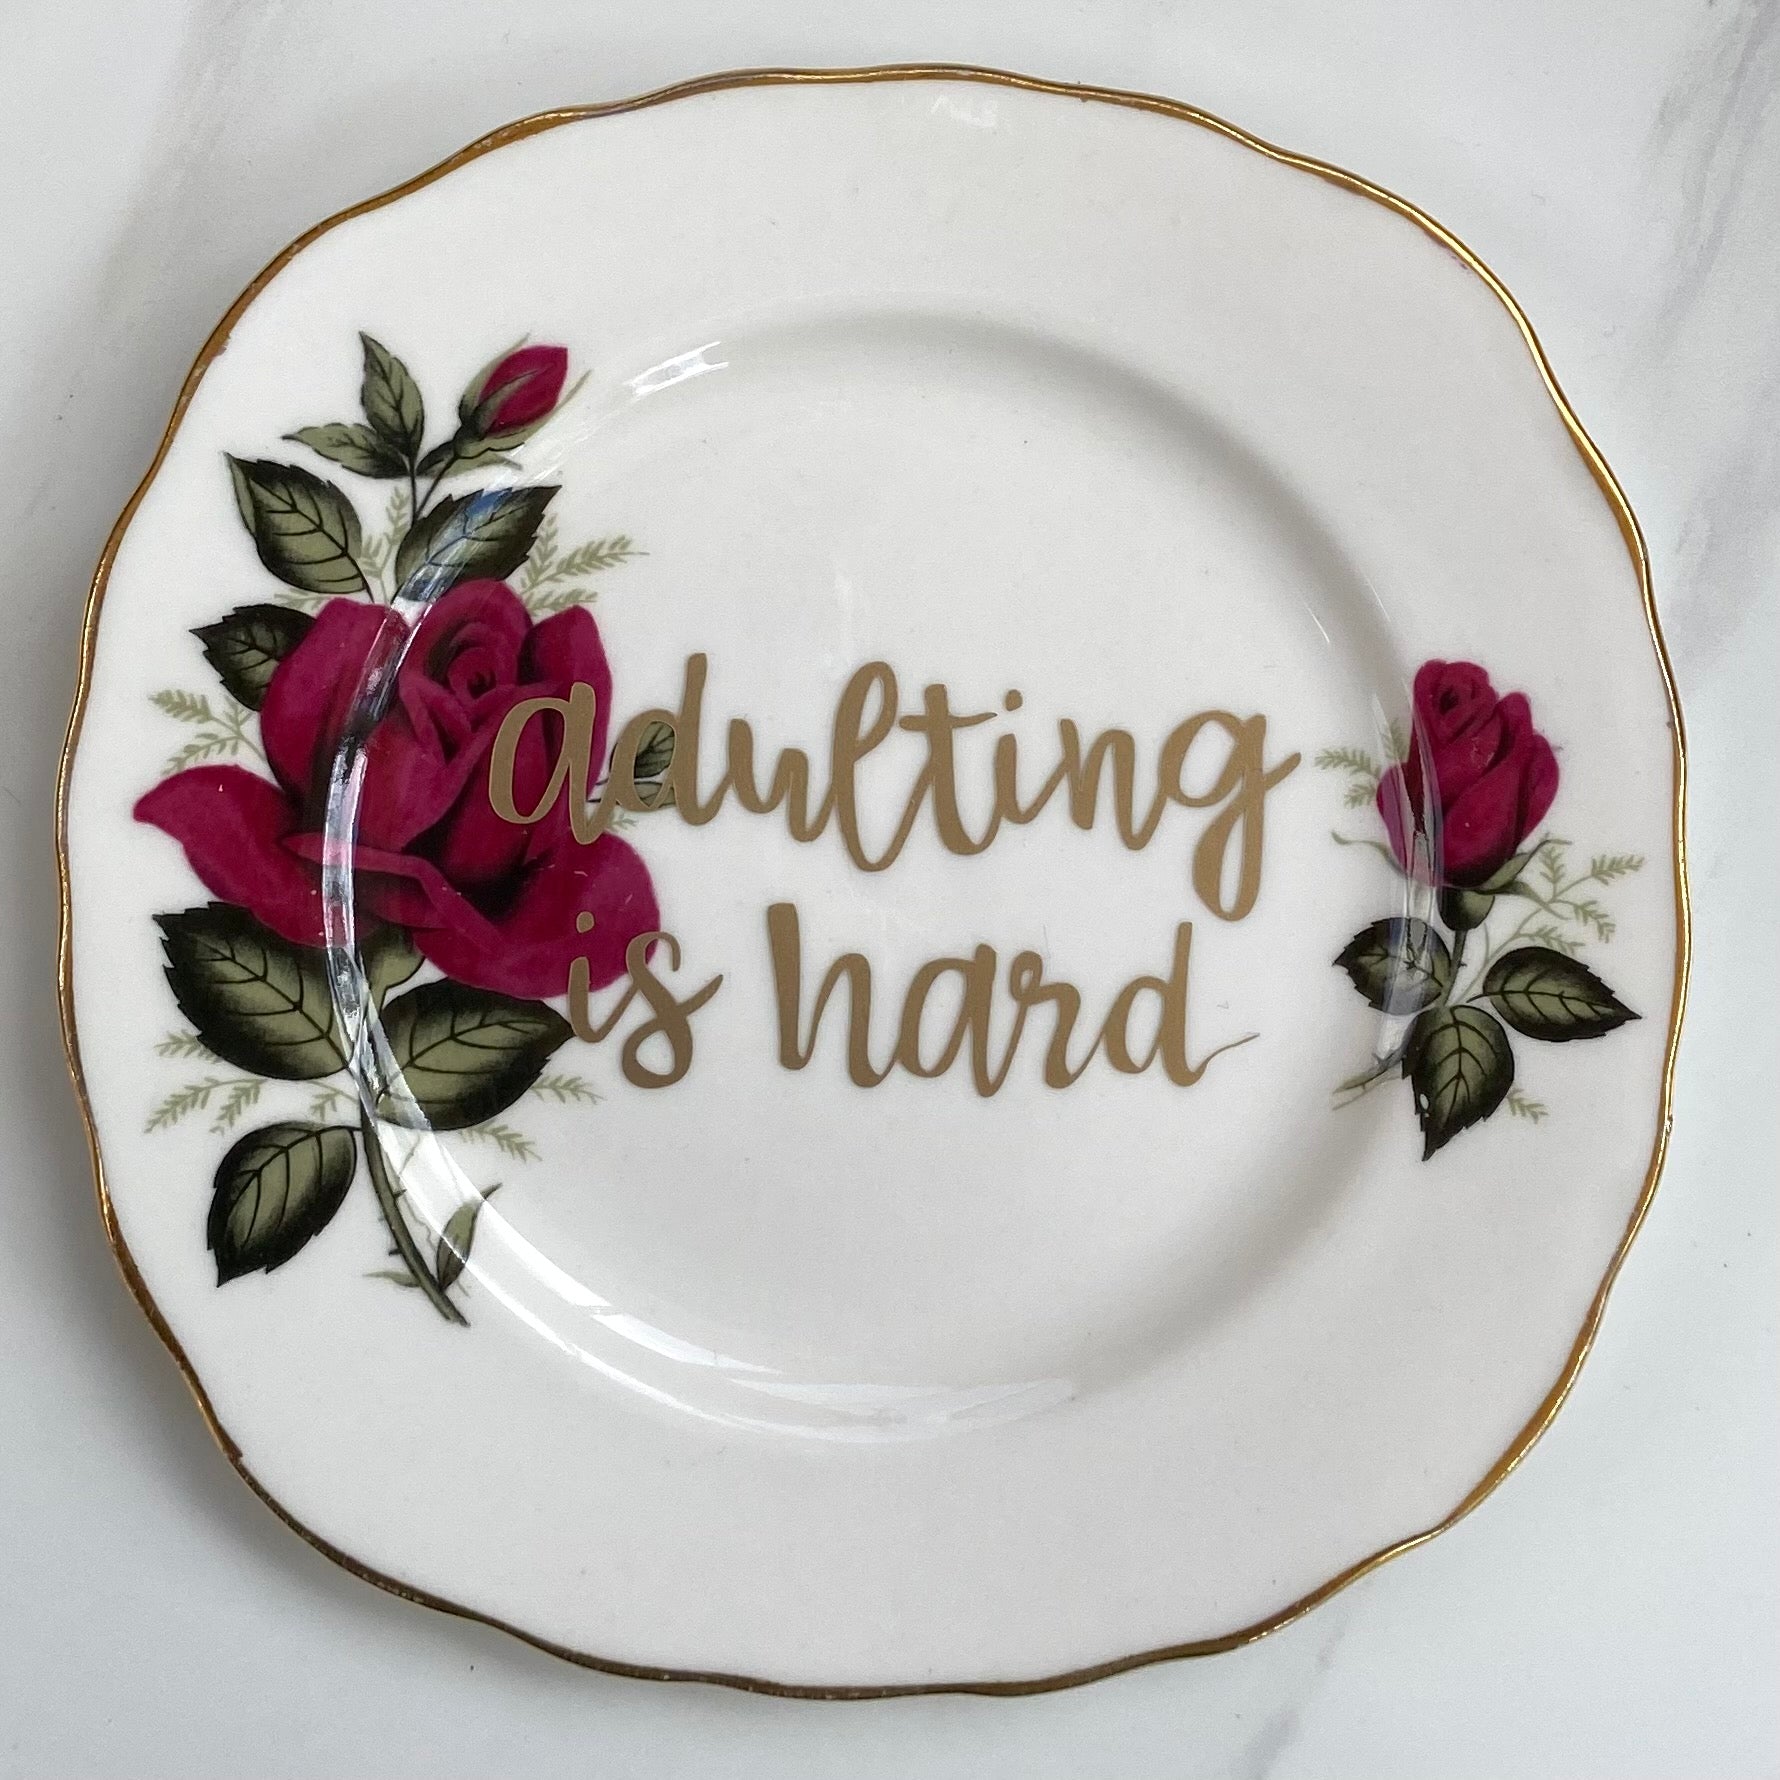 ‘Adulting is hard’ quote on plate